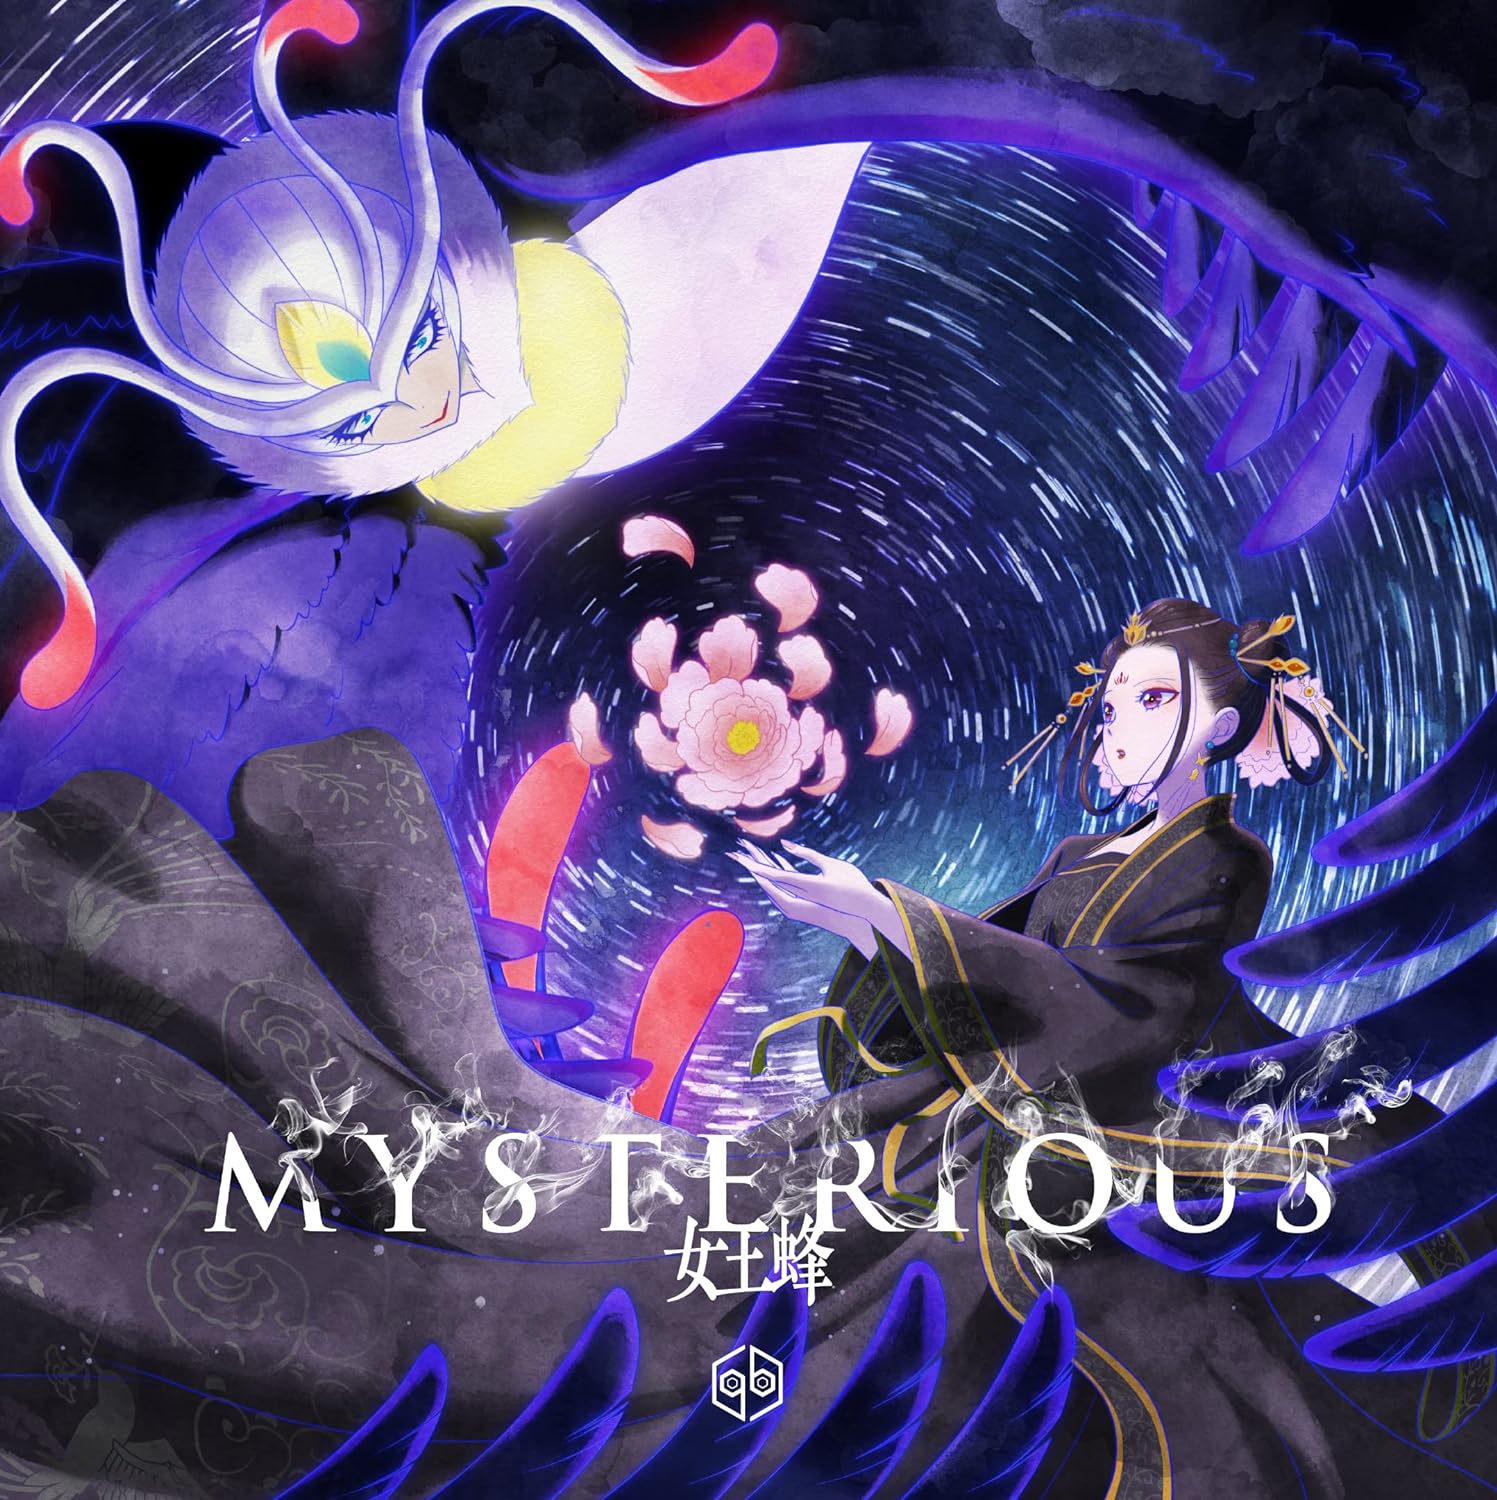 MYSTERIOUS (通常盤)